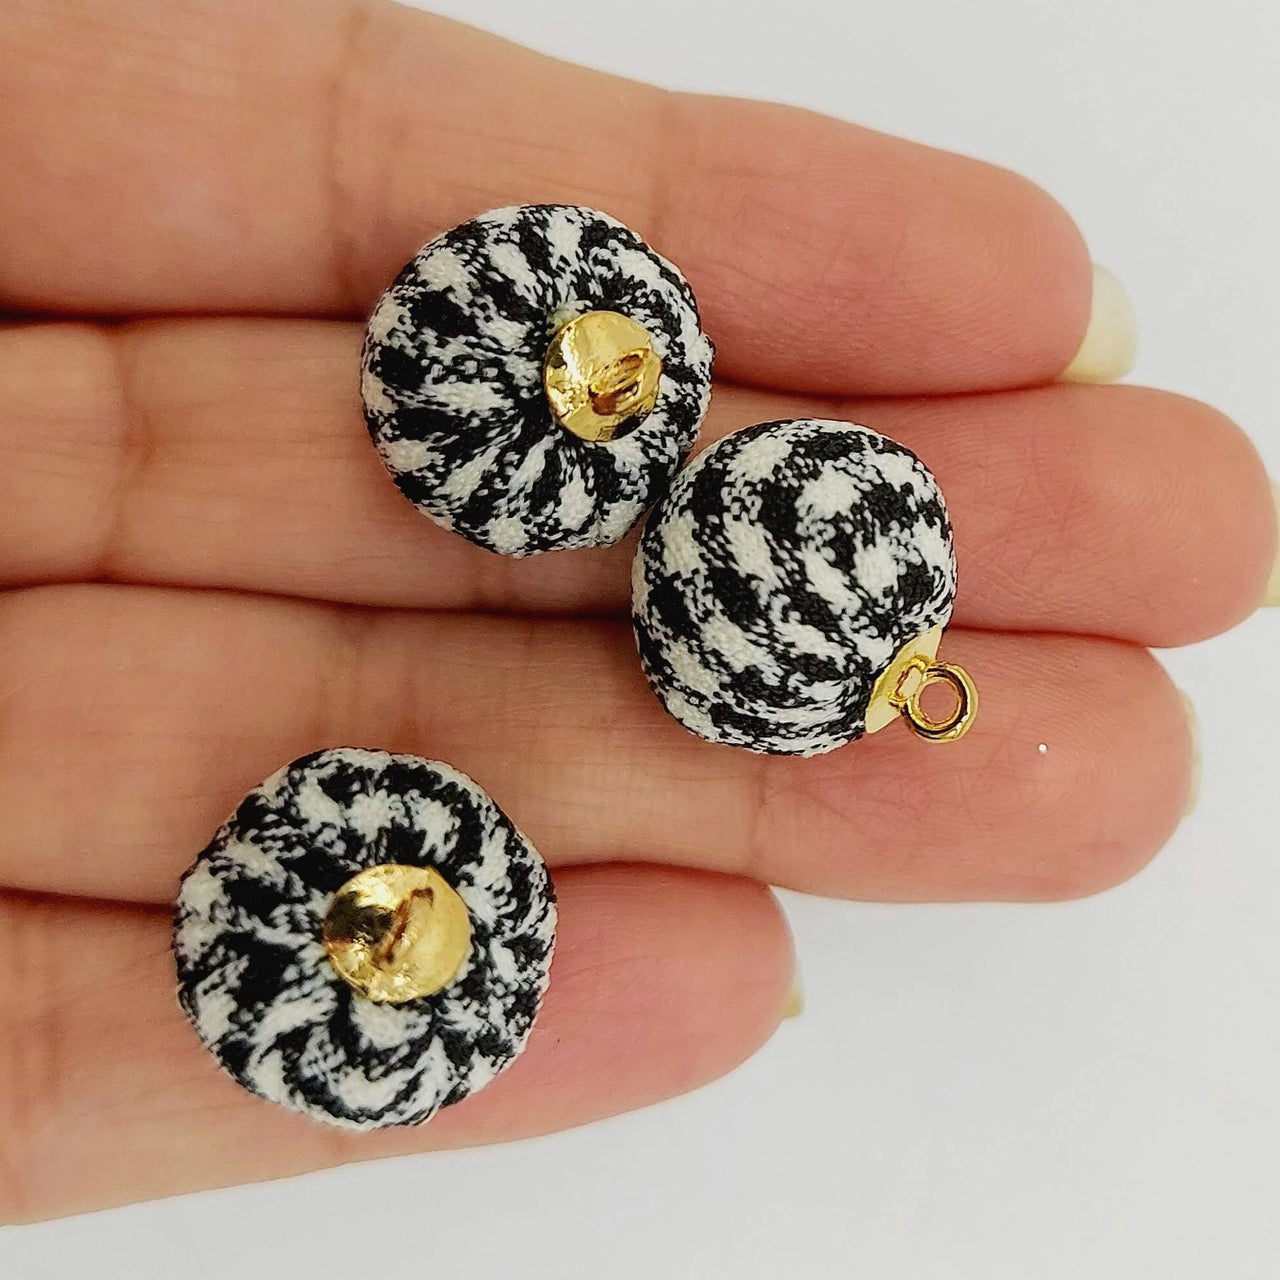 Black and White Checkered Cotton Small Fabric Balls Tassel, Button with Ring Cap, Decorative Tassels